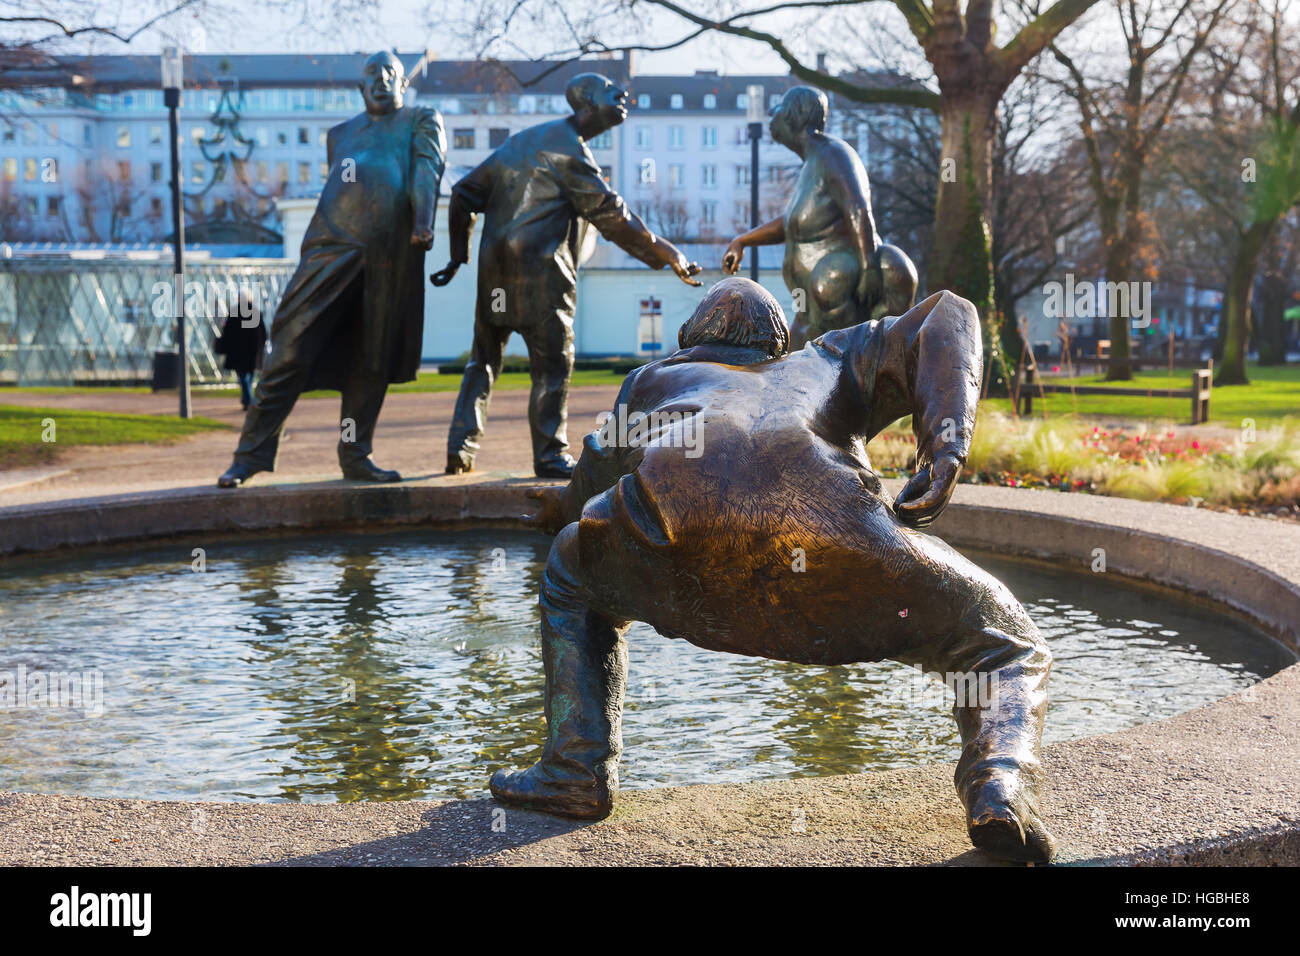 Aachen, Germany - December 27, 2016: bronze statue named circulation of money in Aachen, with unidentified people. Aachen is a spa town in NRW and was Stock Photo